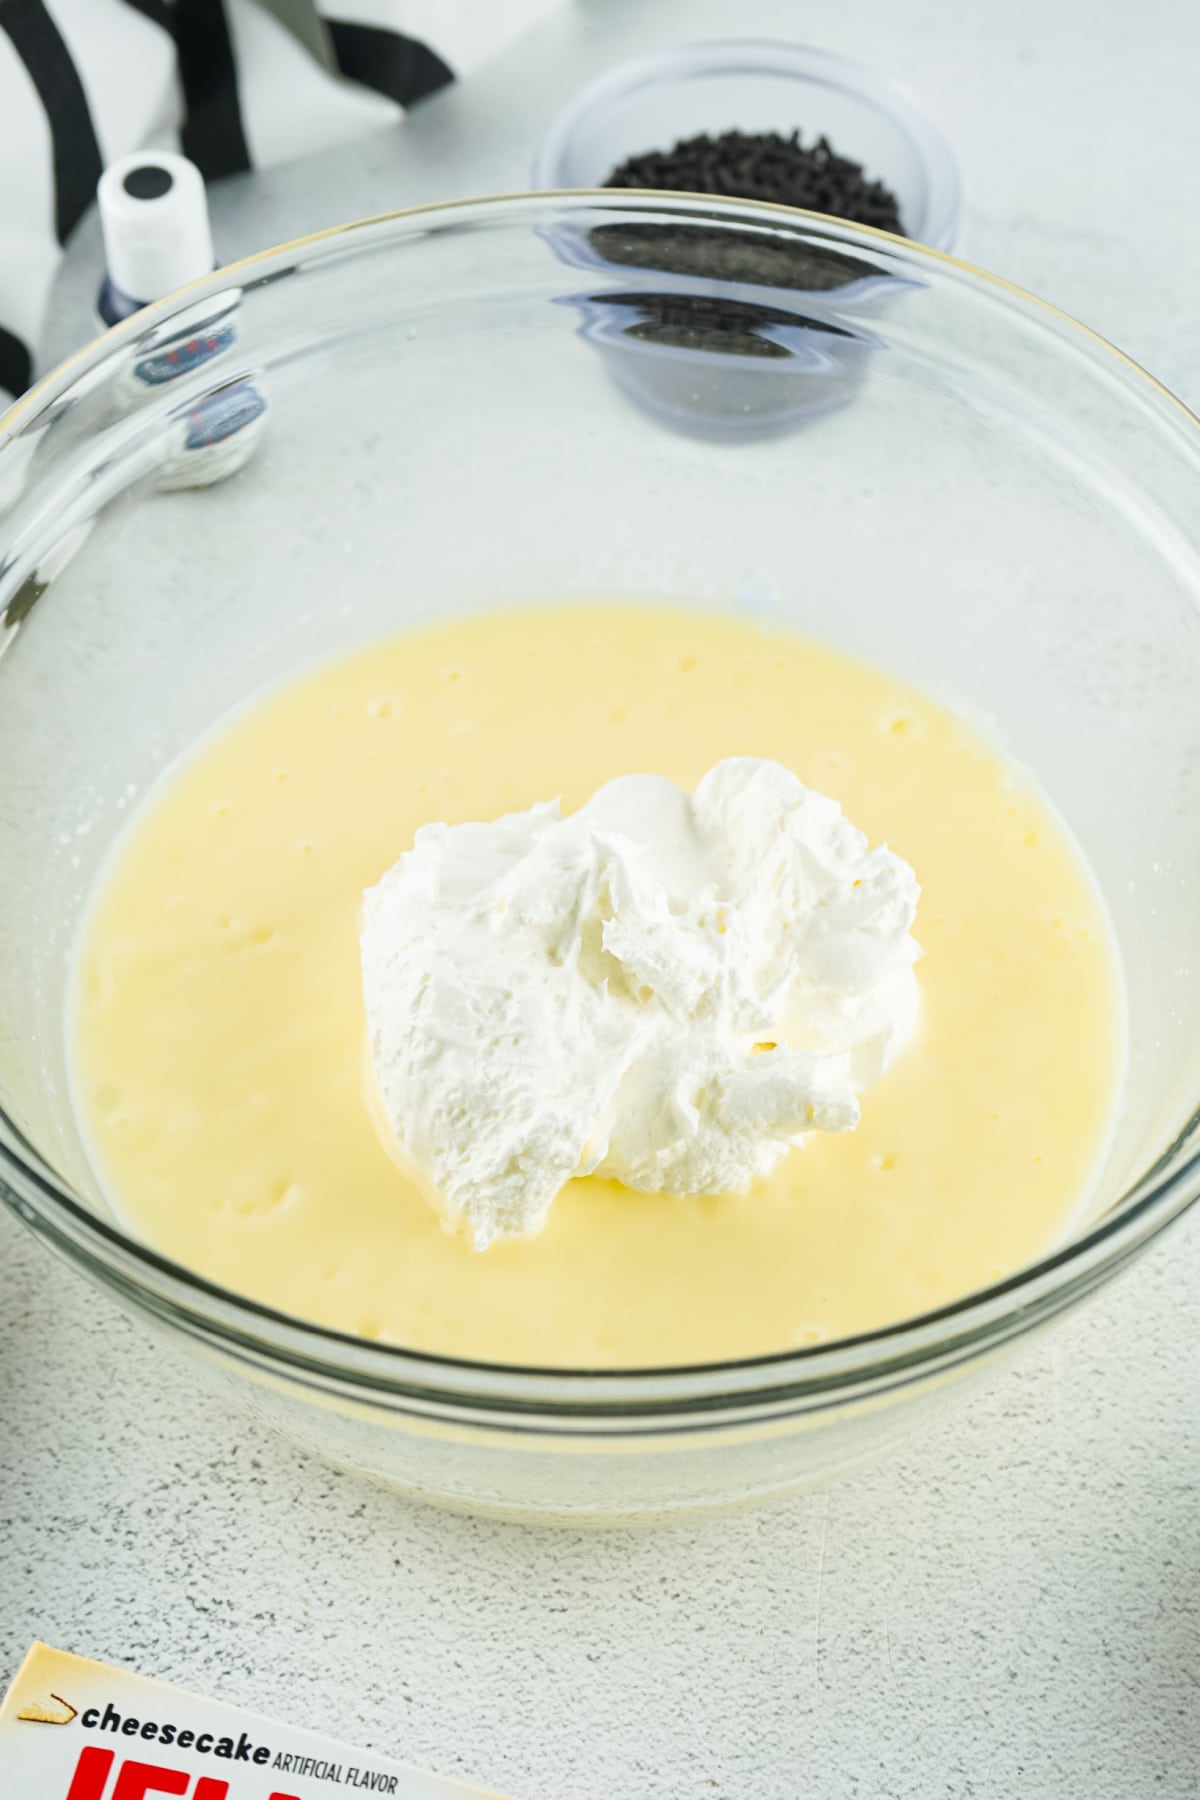 Whipped cream in pudding mixture